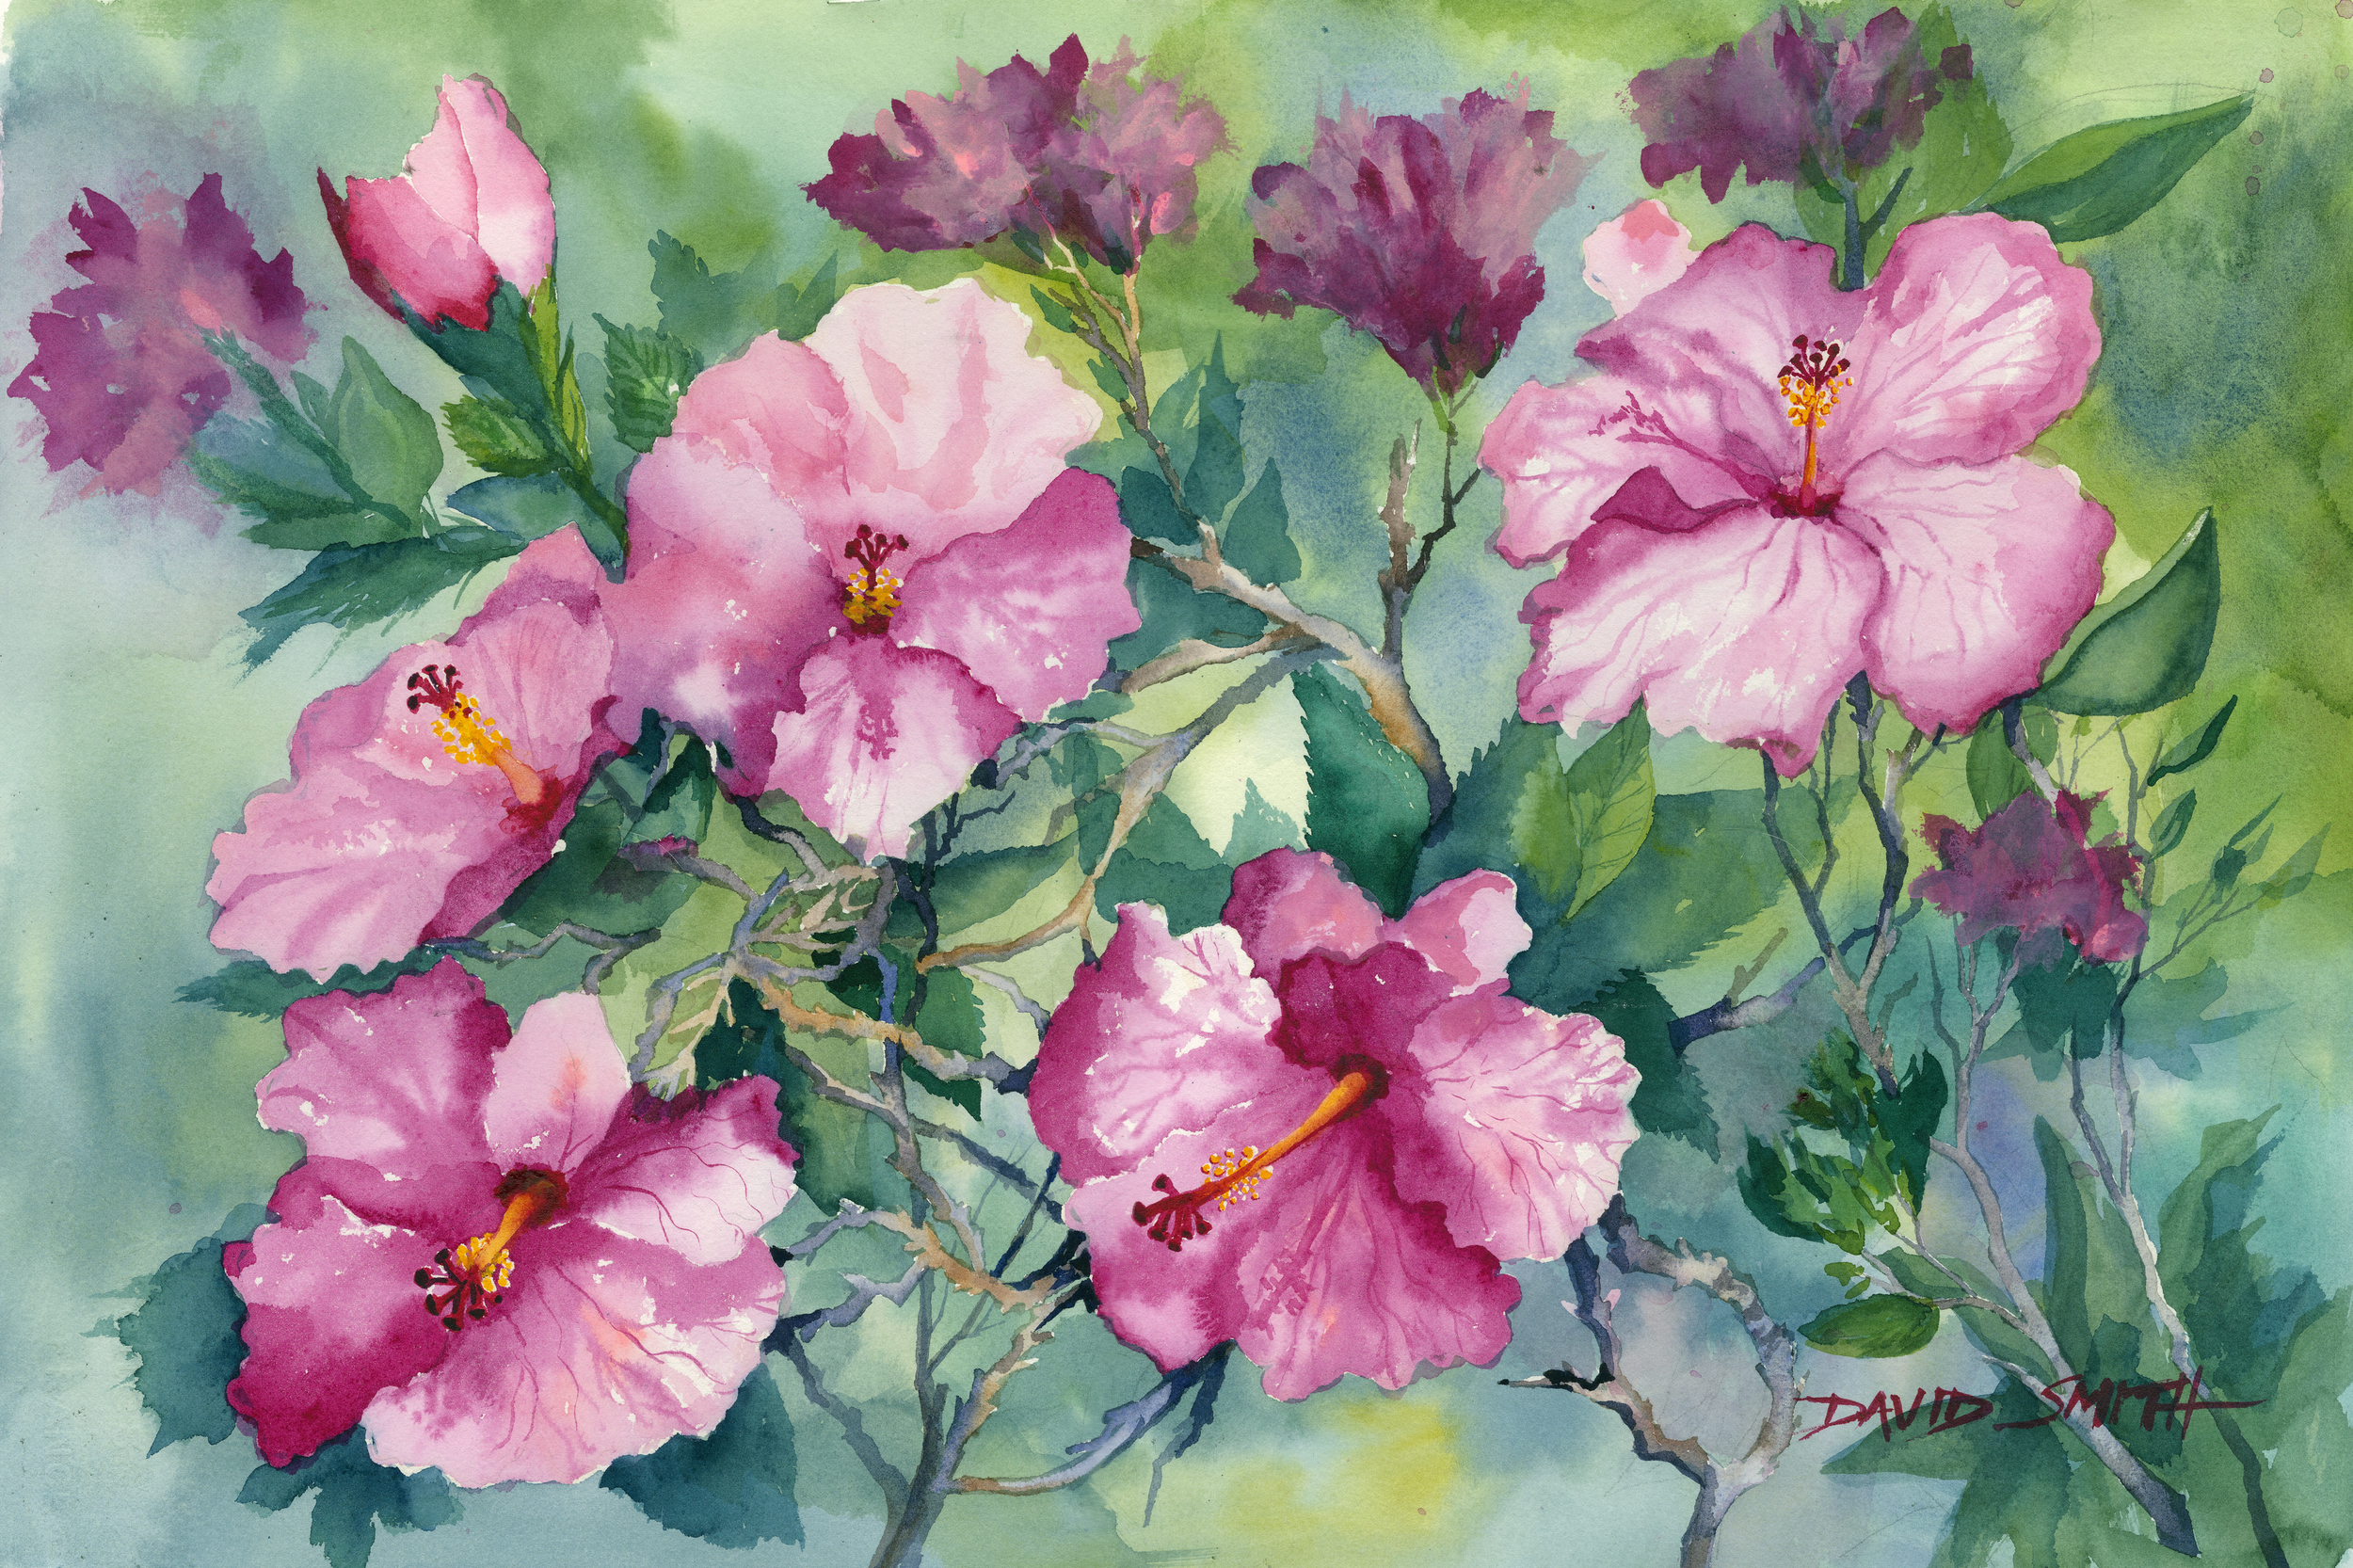 "Hibiscus #1 " - Sold - Prints Available